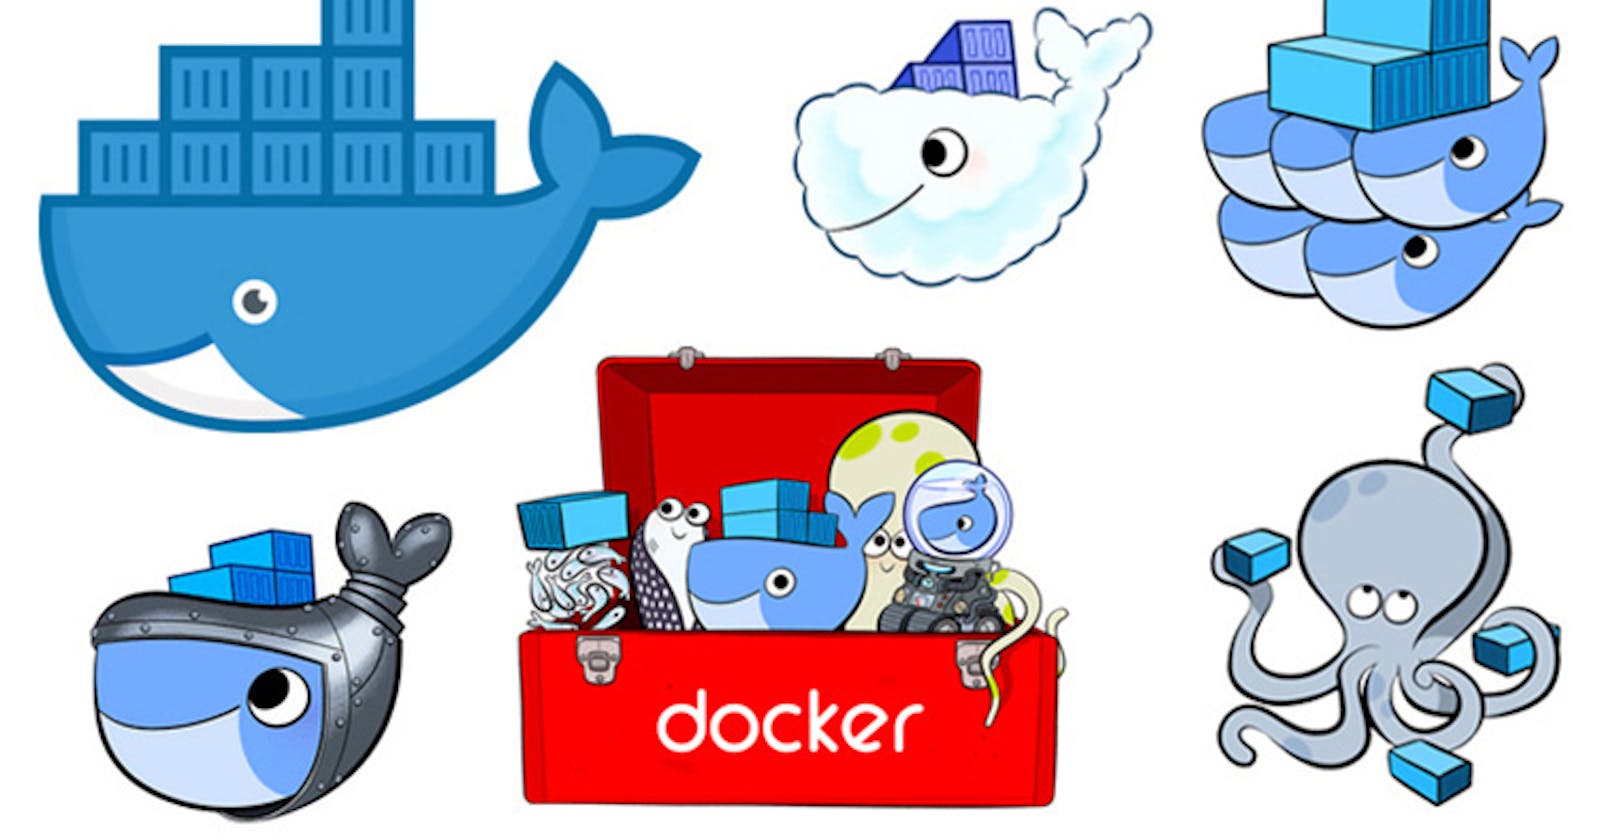 Docker !! What it is ? And why everyone is talking about it ?